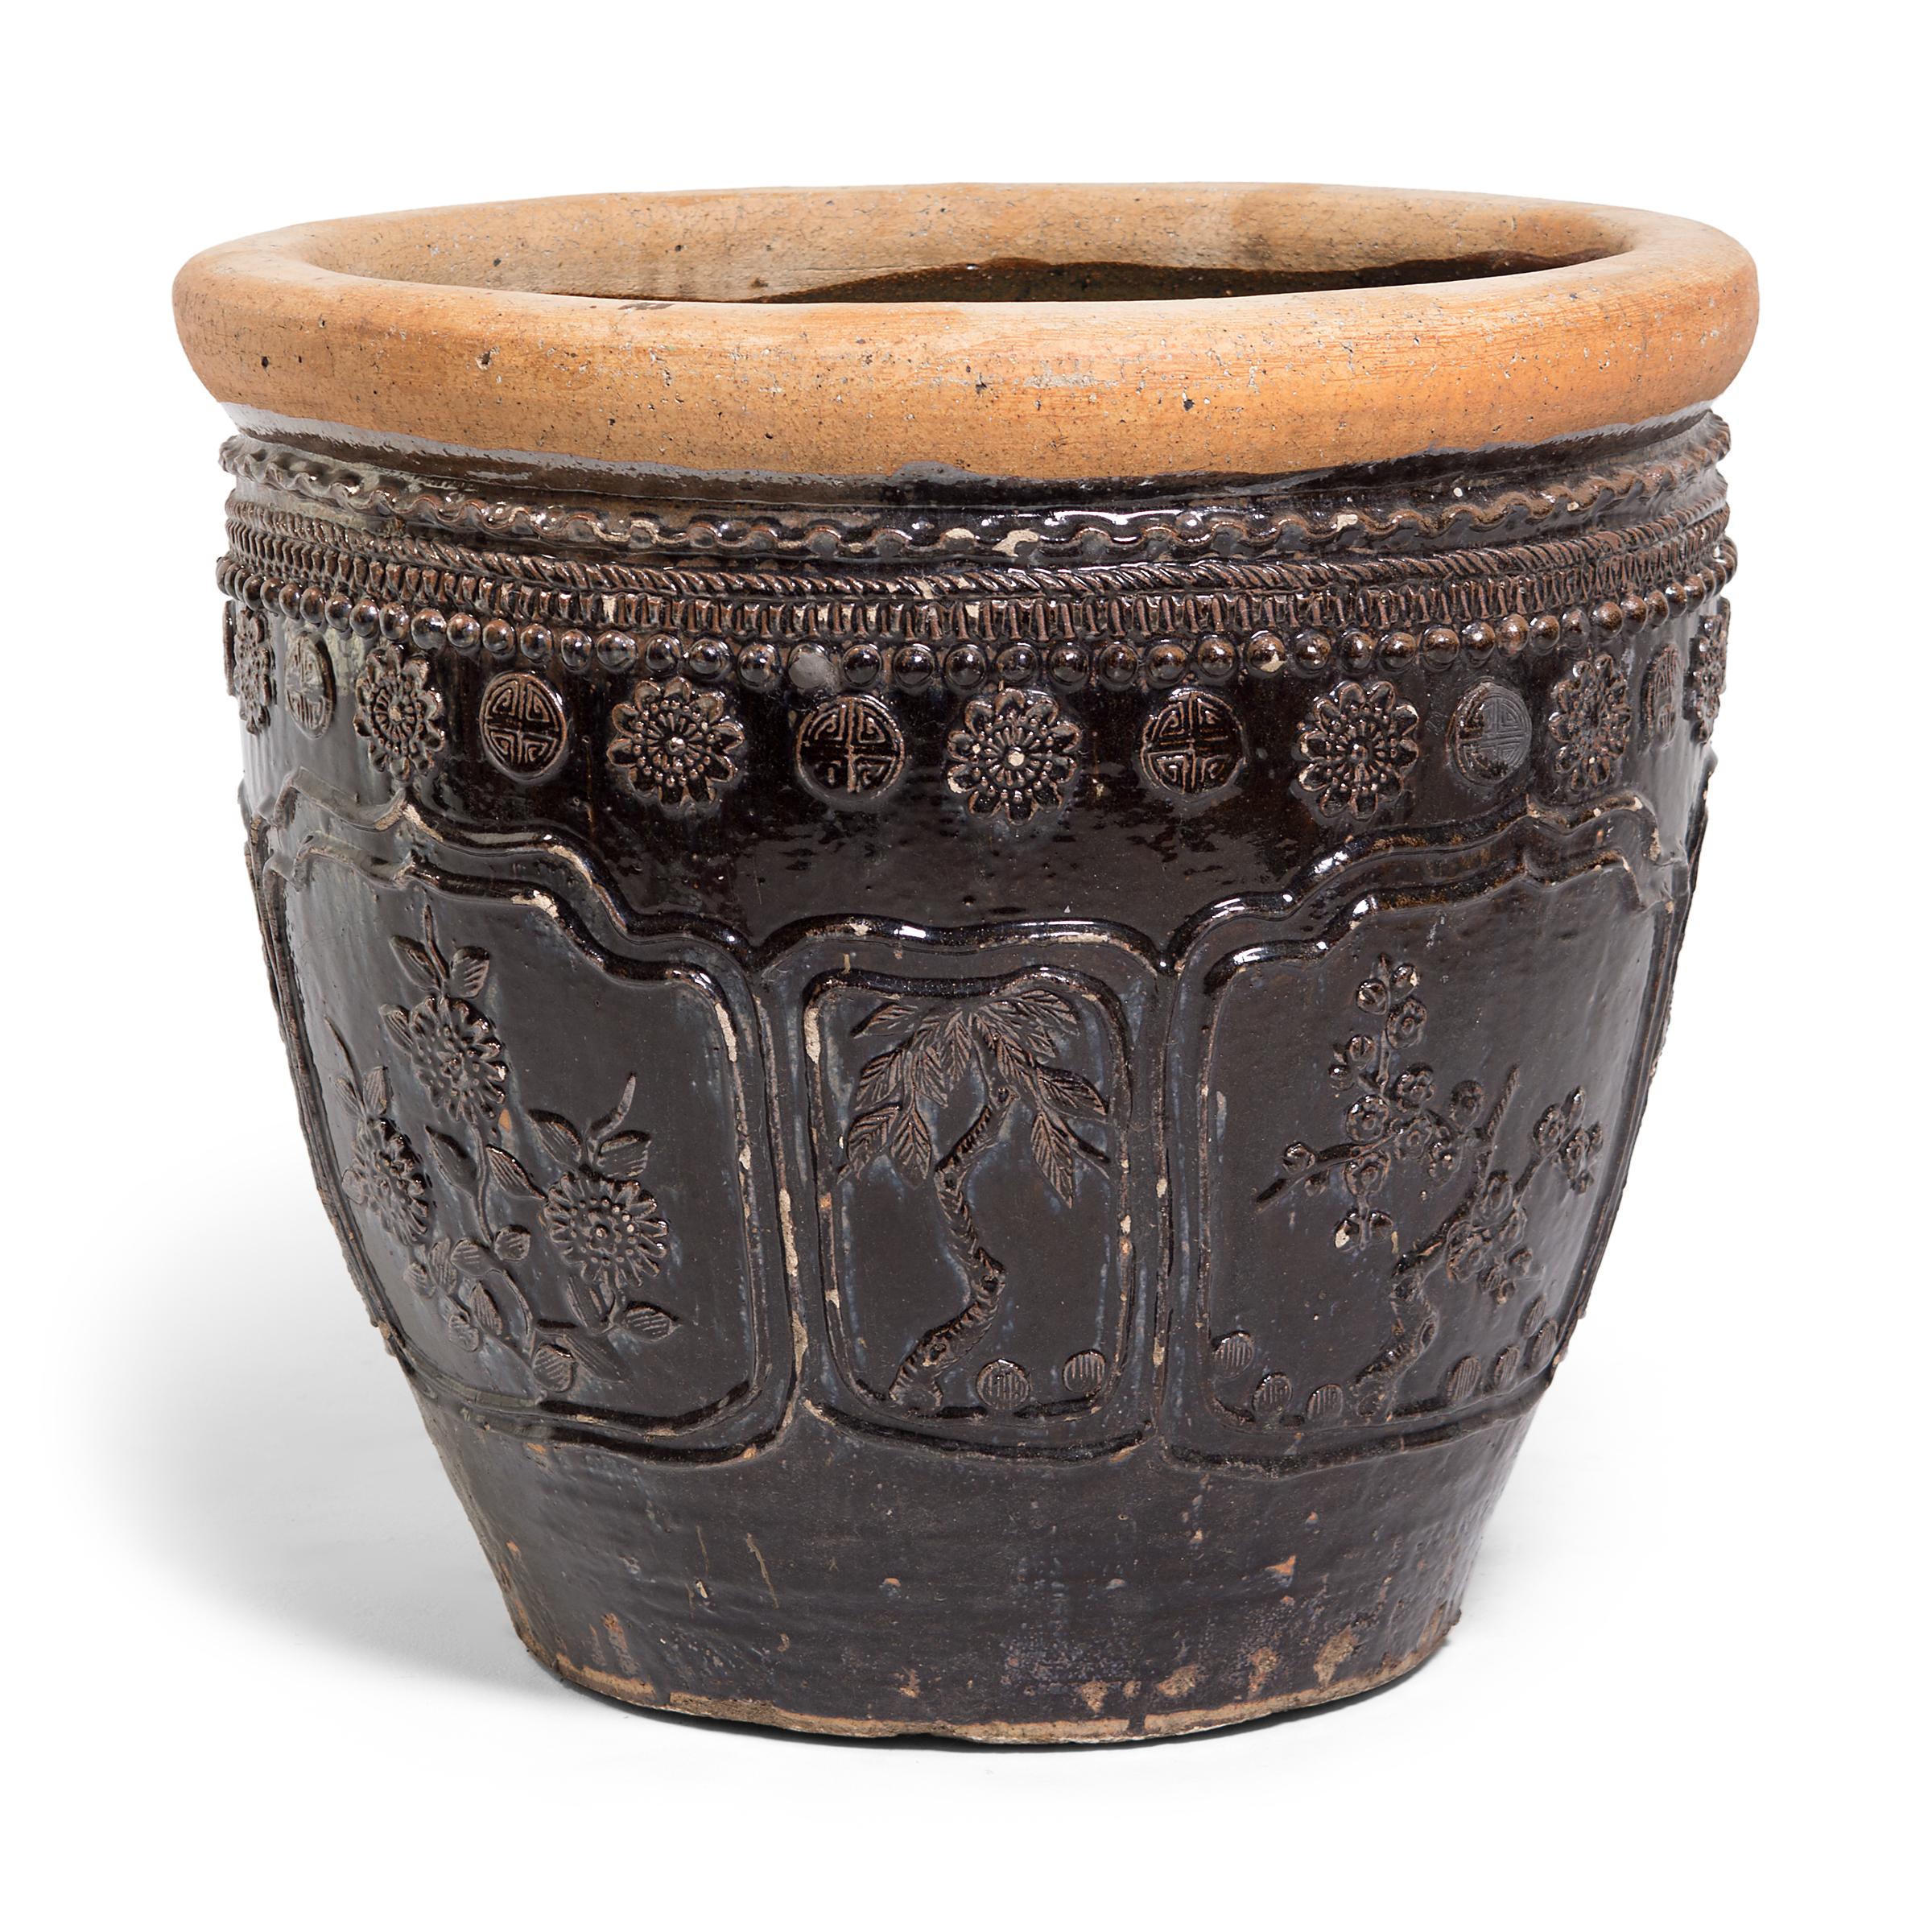 This large glazed jar was handcrafted in China's Shanxi province over a century ago. Masterfully crafted, the jar is patterned in high relief, featuring medallion portraits of chrysanthemums, plum blossoms, bamboo, and pine branches. A textured trim